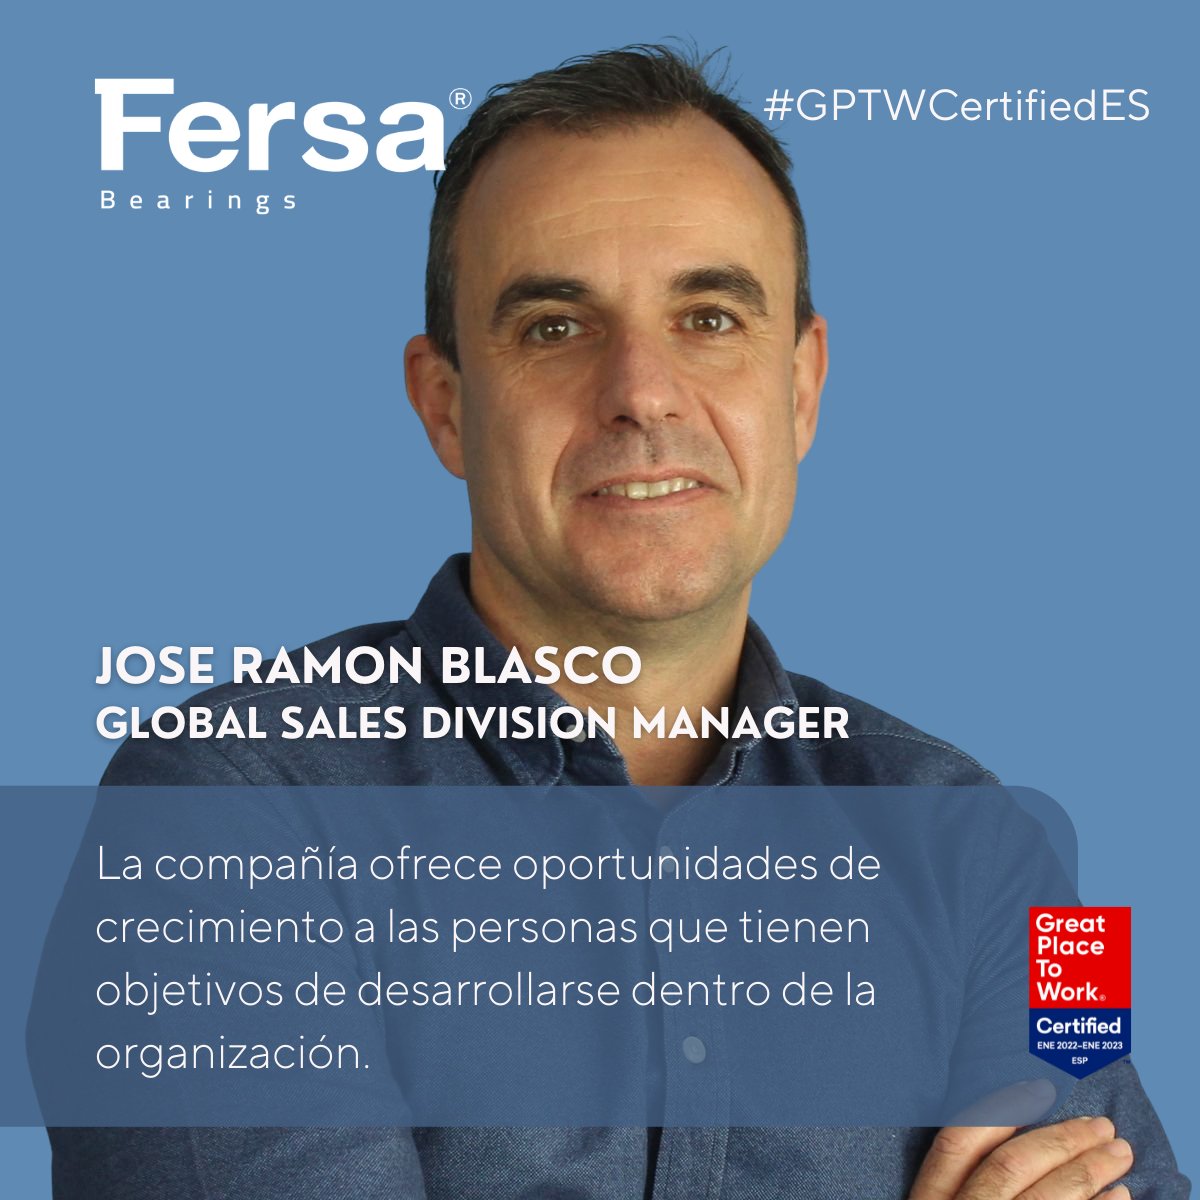 '#FERSA offers growth #opportunities to people who have development goals within the organization.'

🧐😏 Check out our opportunities 👉🏼 fersa.epreselec.com/Ofertas/Oferta…

#GPTWCertifiedES #FERSAStyle #InnovativeSpirit